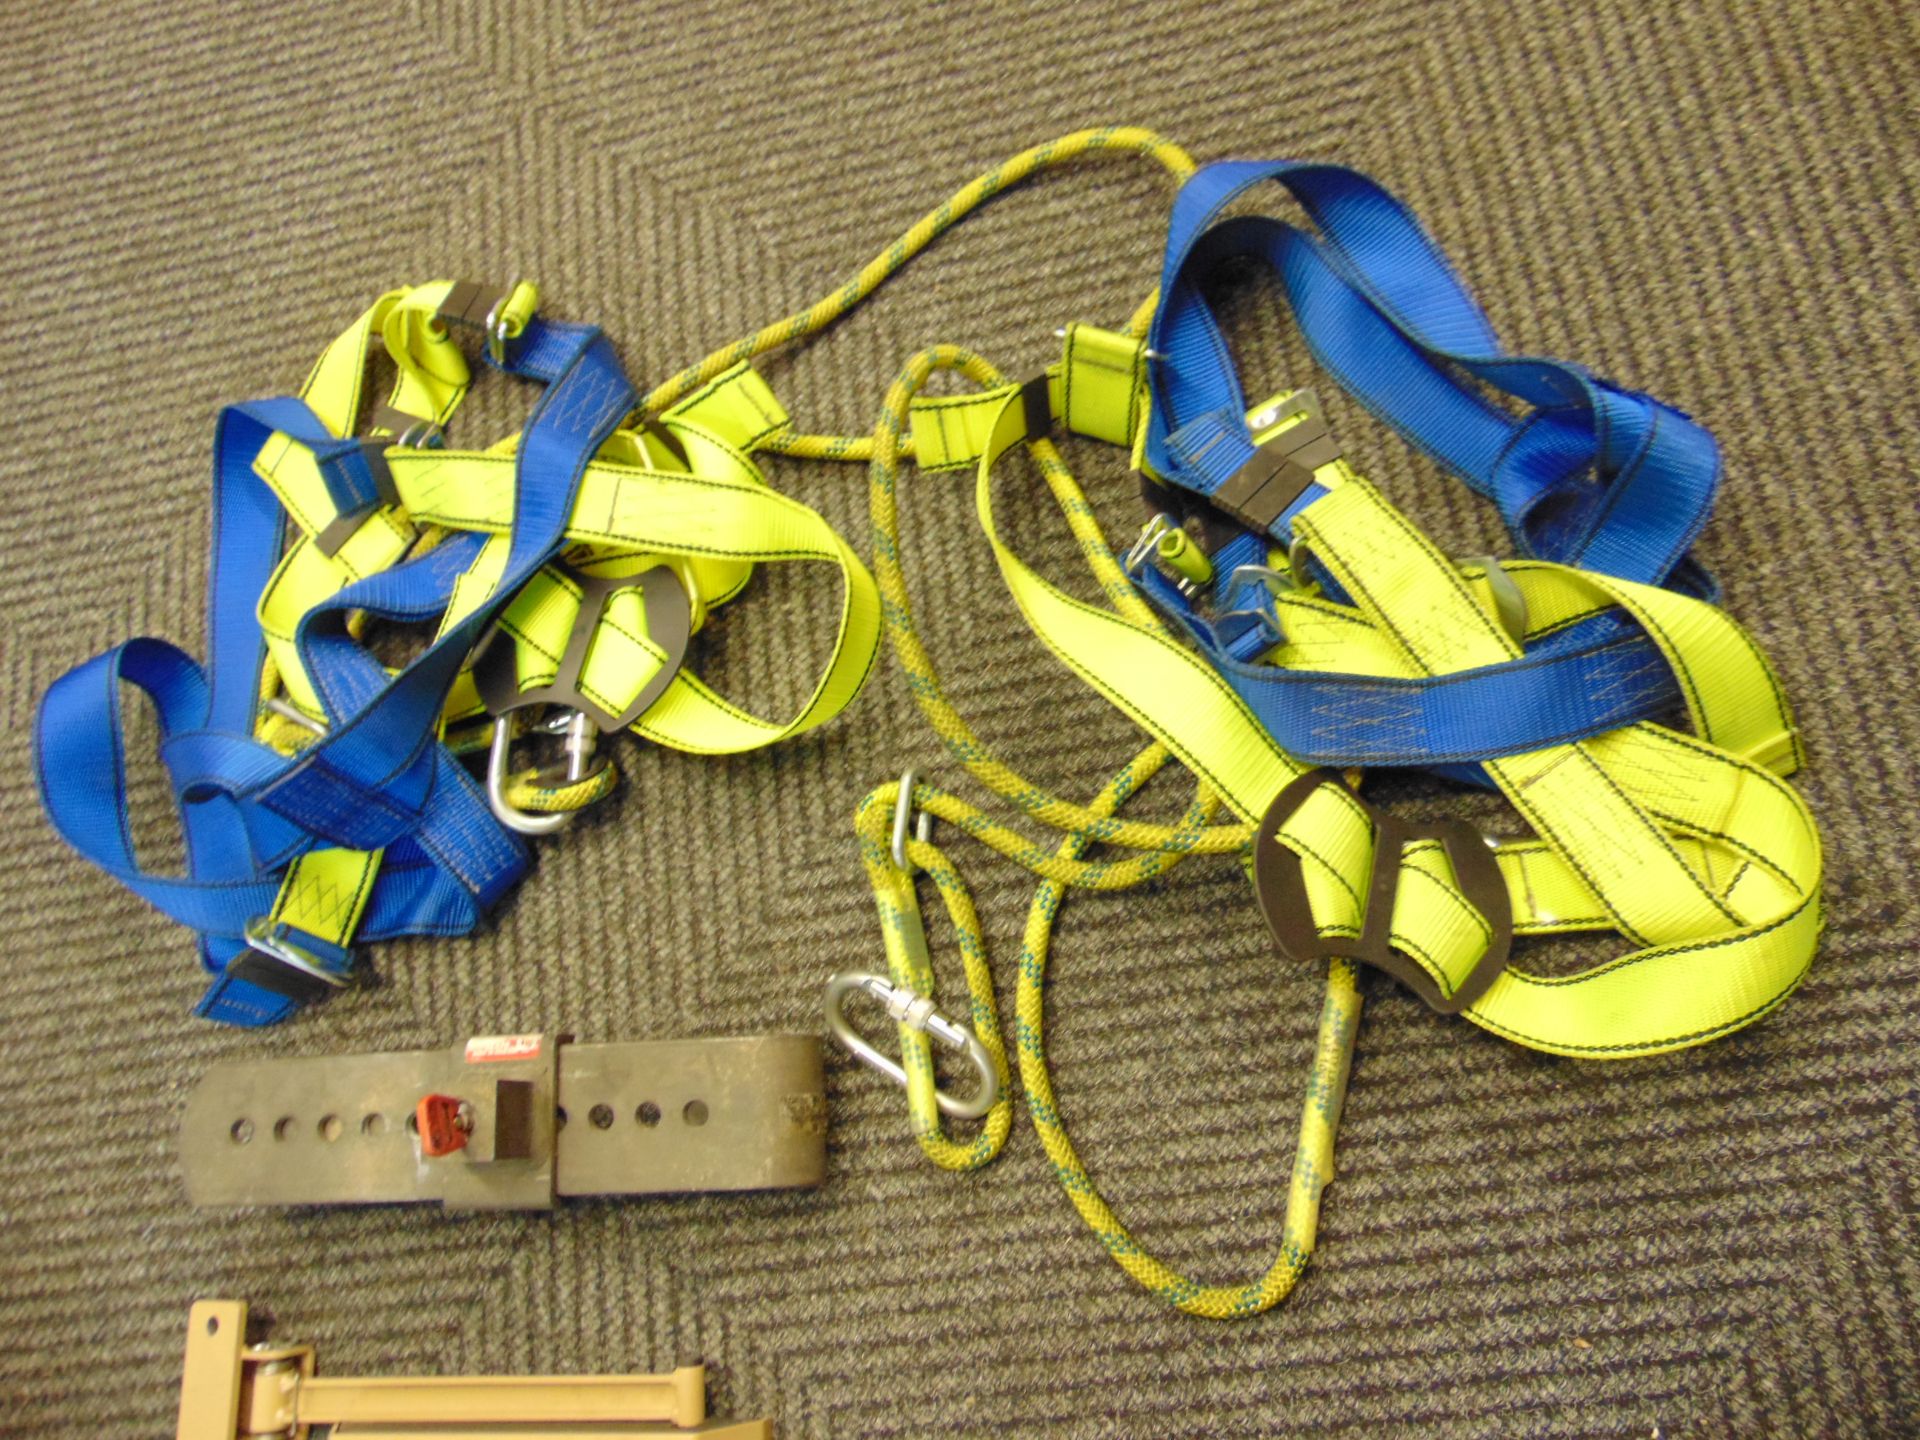 Pedal Lock Anti Theft Device, 2x Climbing Harnesses & Door Stay - Image 2 of 5